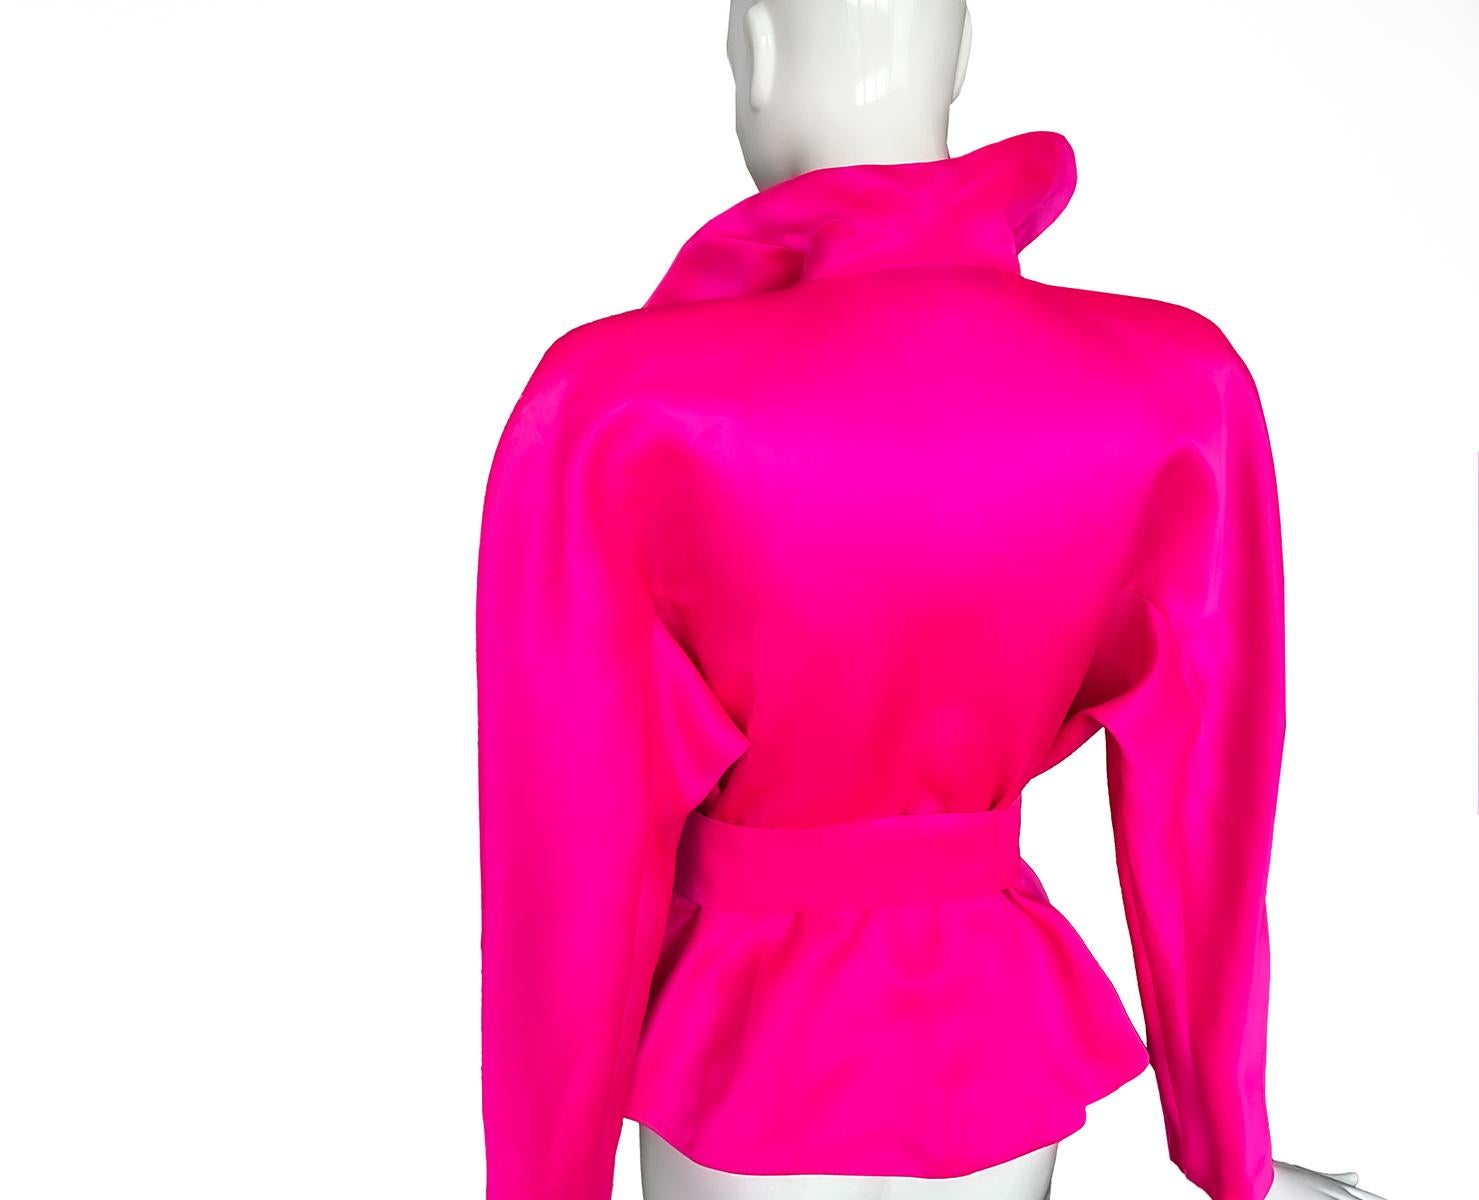 Rare 1988 Thierry Mugler Collectos Piece.
HOT PINK Thierry Mugler Vision!  This colour is out if this world!!
The most dramatic hot pink silk blouse. Fabulous dramatic statement collar, wired inside to create the structural shape, deep V-neck and